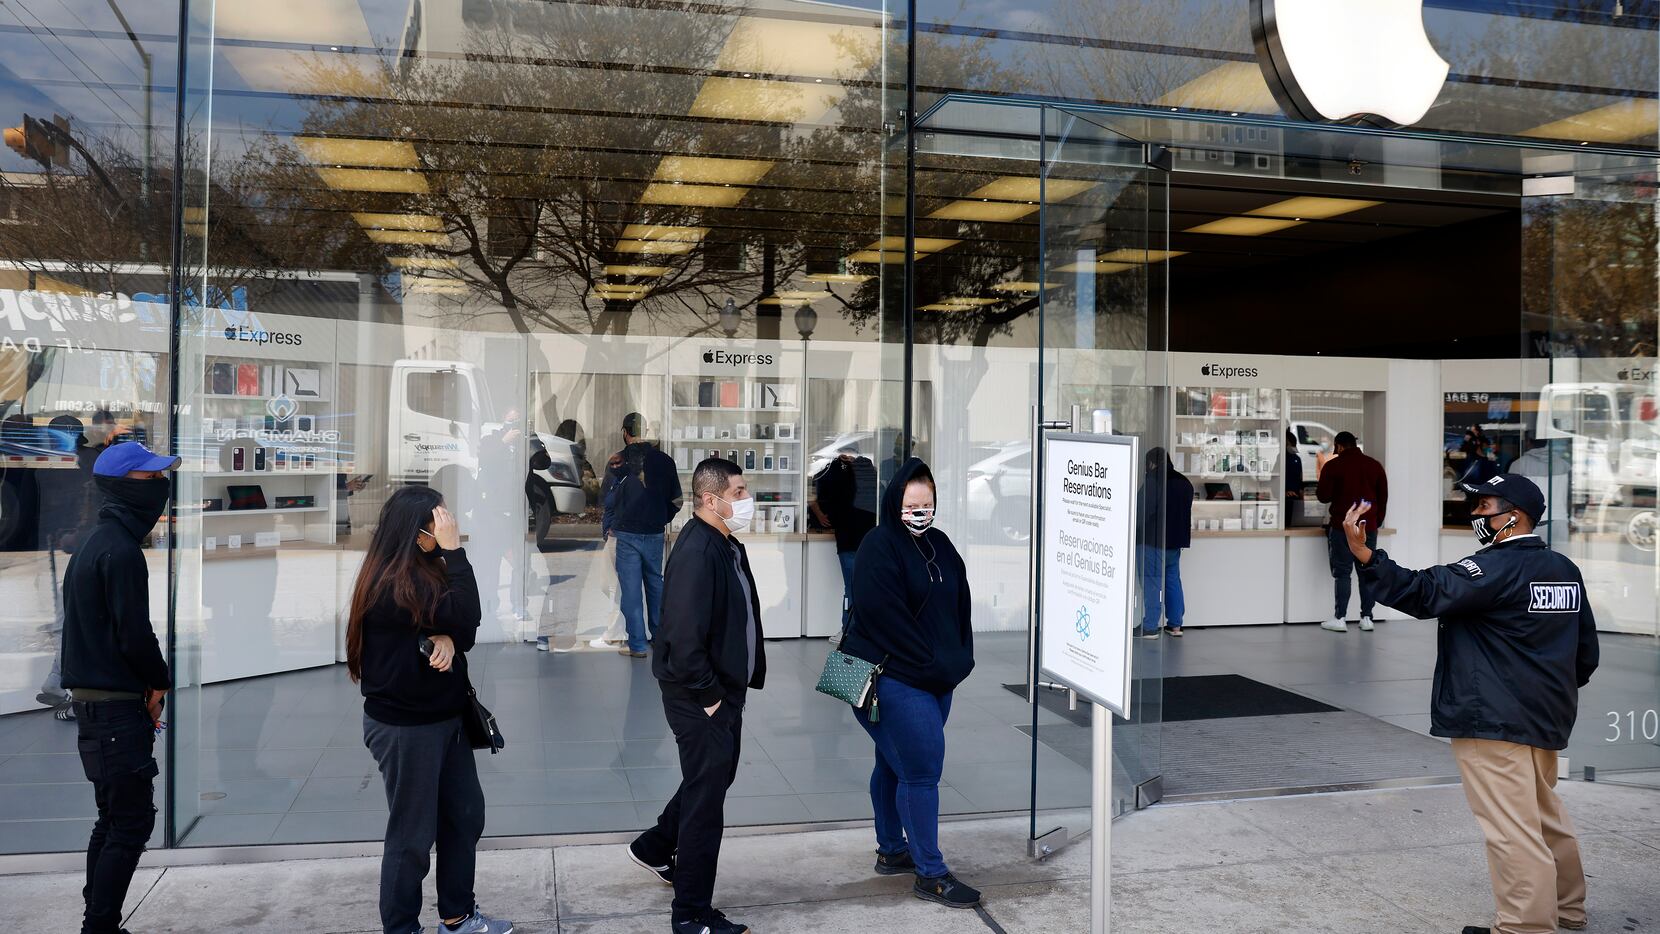 February 12, 2018 - Dallas, TX, USA - An Apple store is seen here